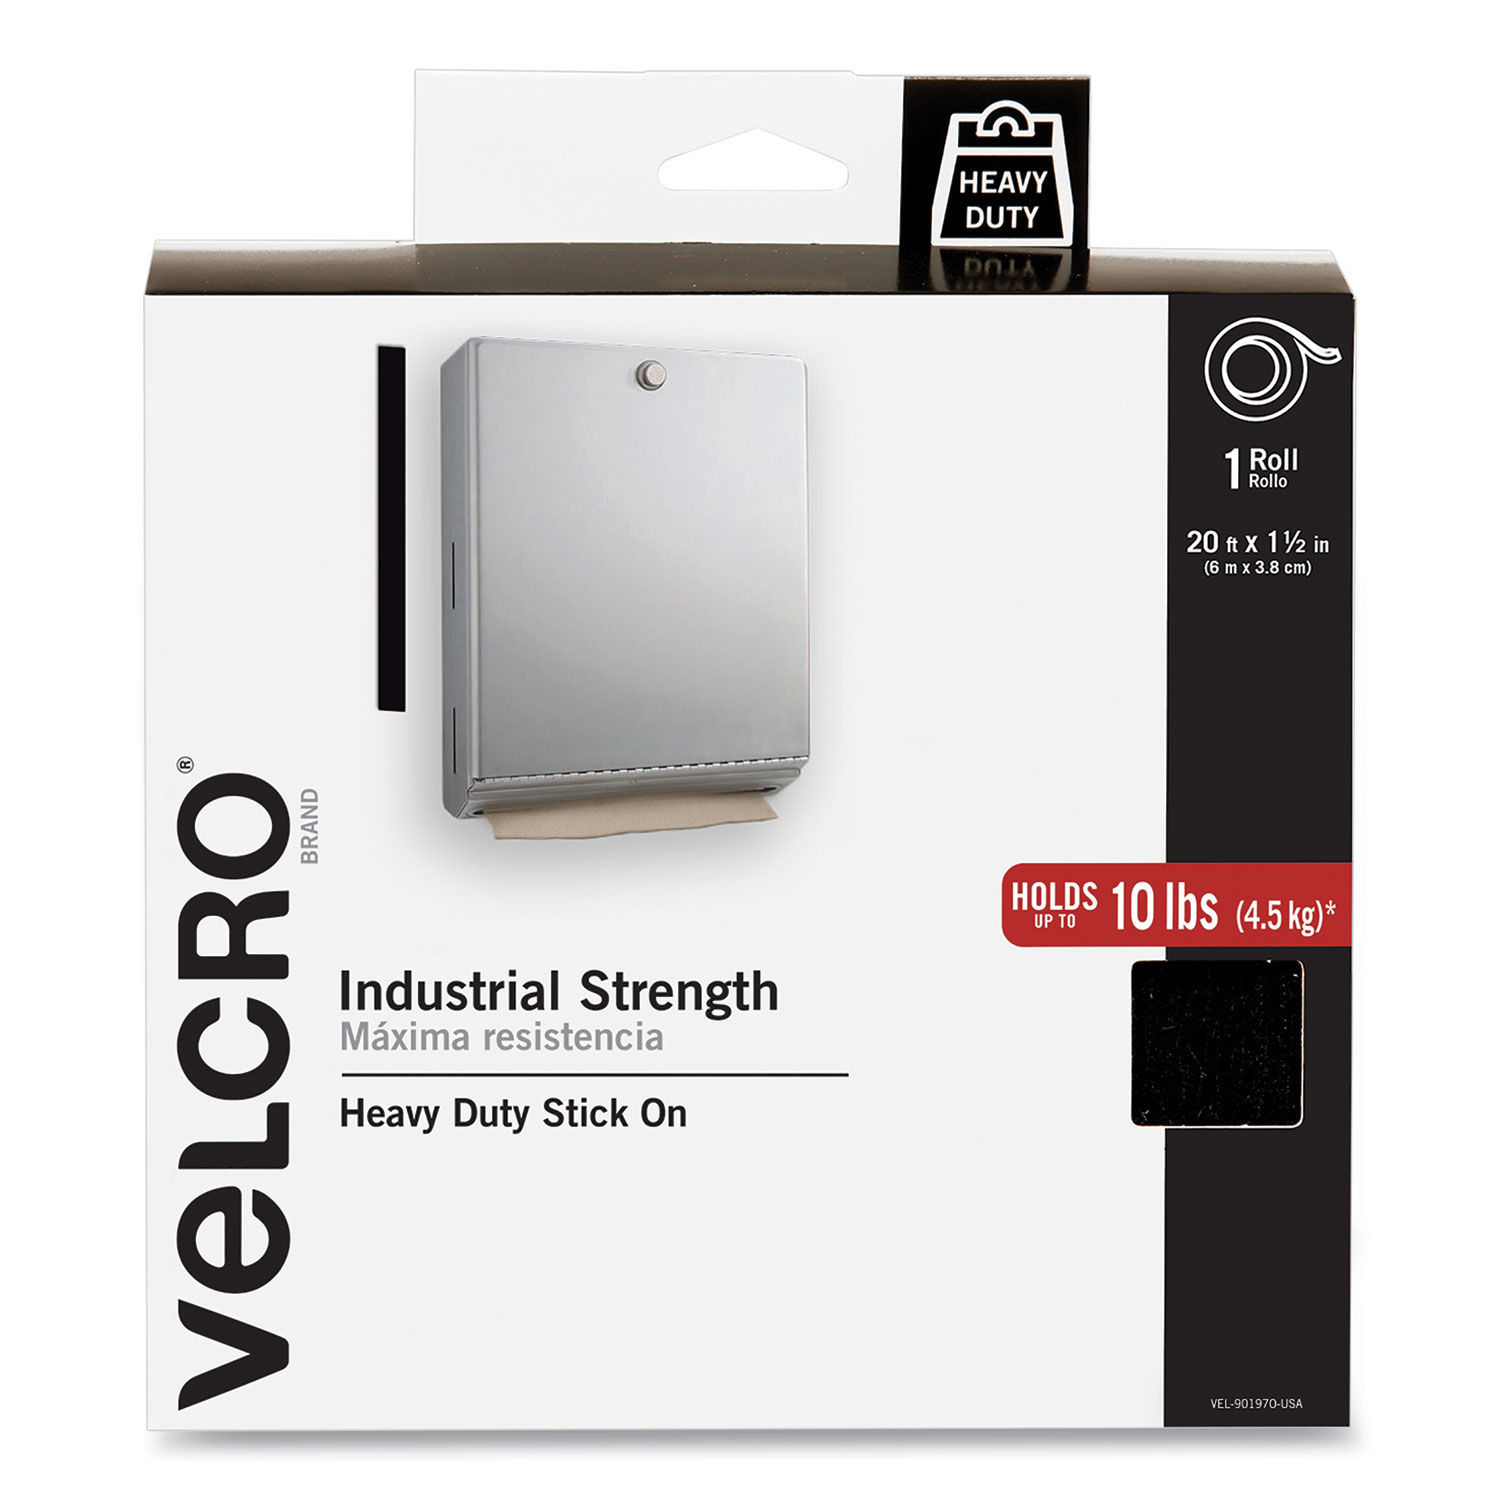 Industrial-Strength Heavy-Duty Fasteners with Dispenser Box by VELCRO® Brand  VEK90197